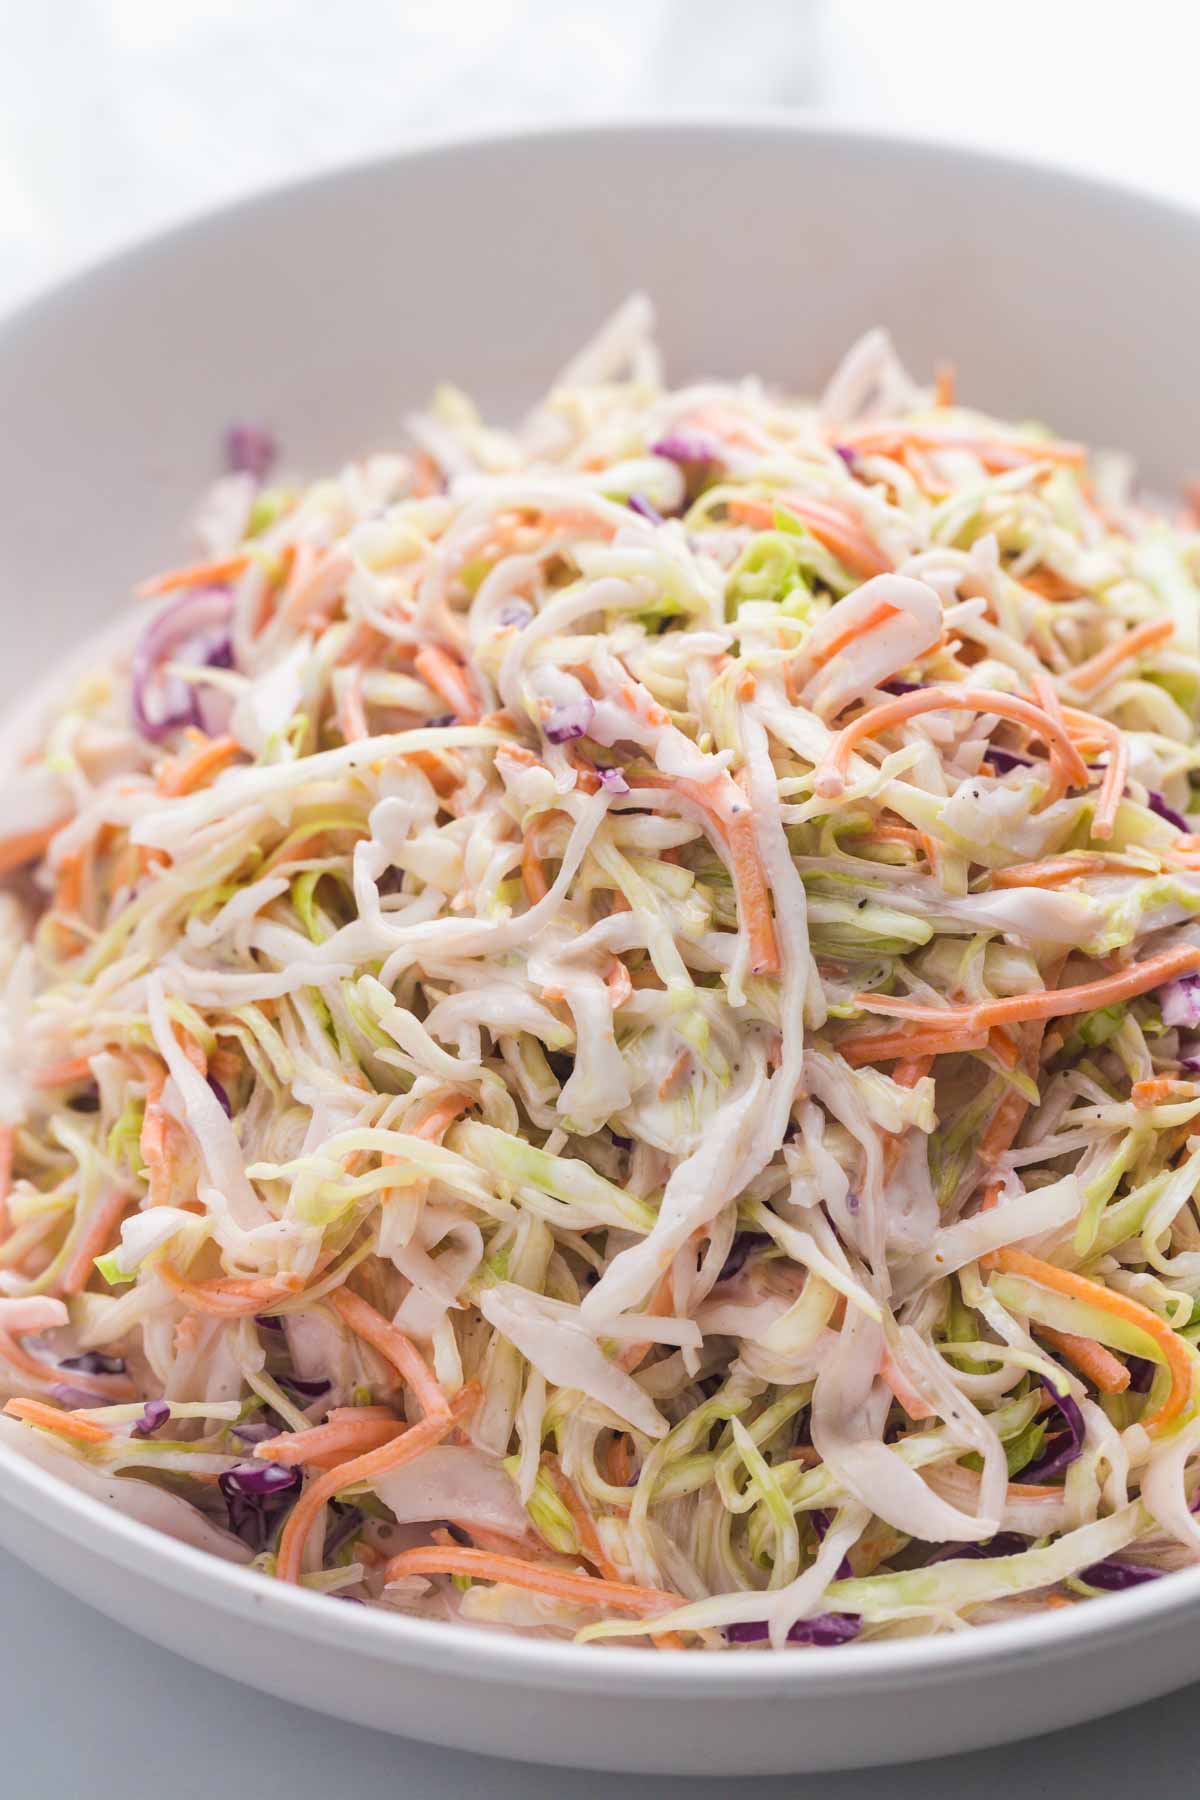 Best Coleslaw Recipe (With Easy Homemade Dressing!) - Little Sunny Kitchen